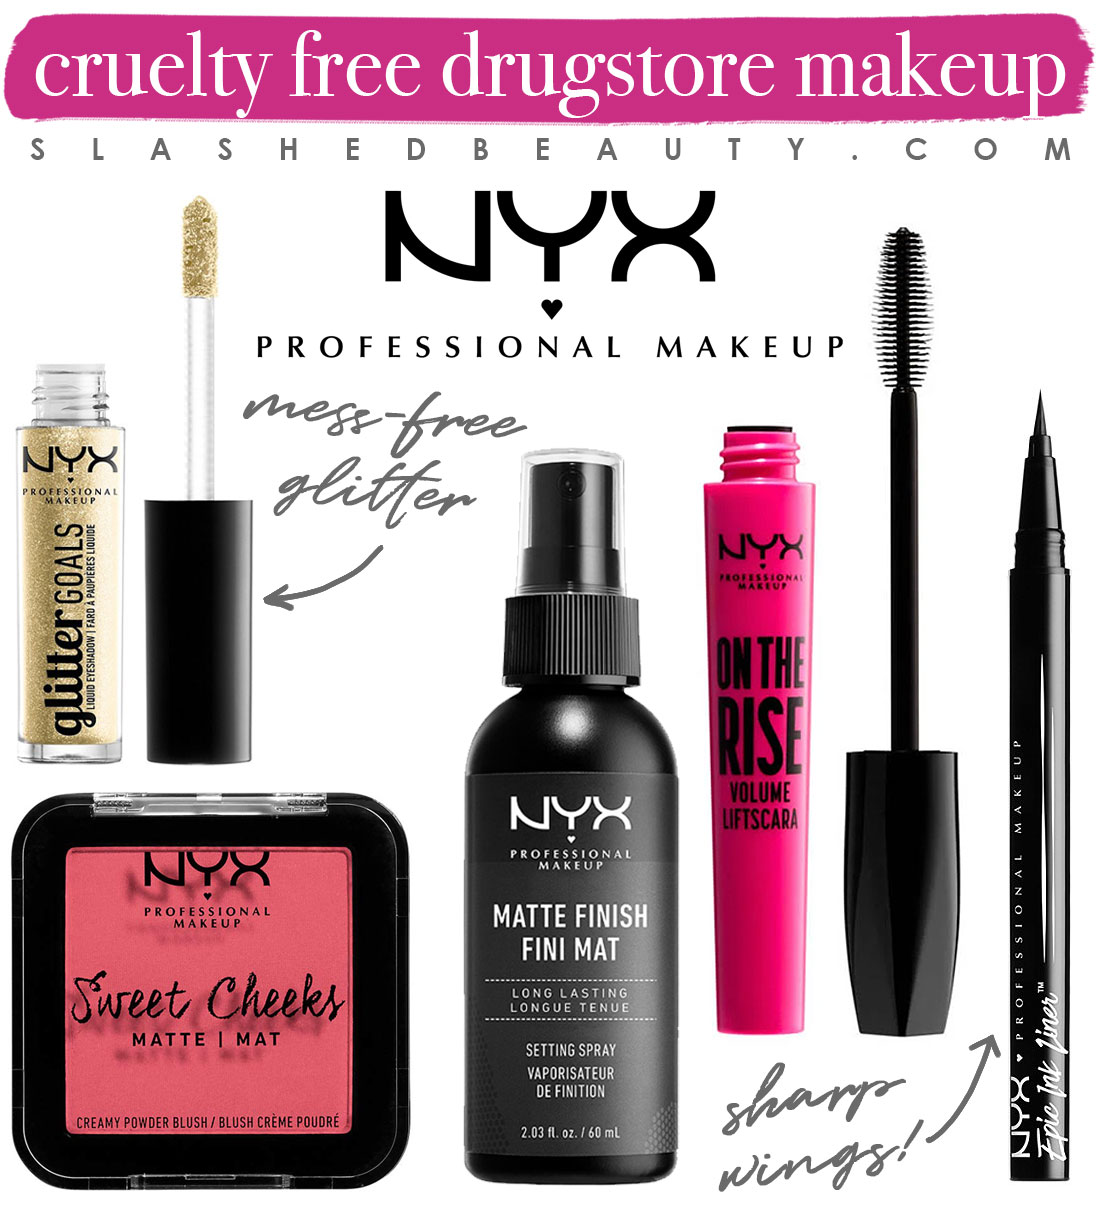 My 5 Favorite Cruelty Free Drugstore Makeup Brands | NYX Makeup Collage | Slashed Beauty